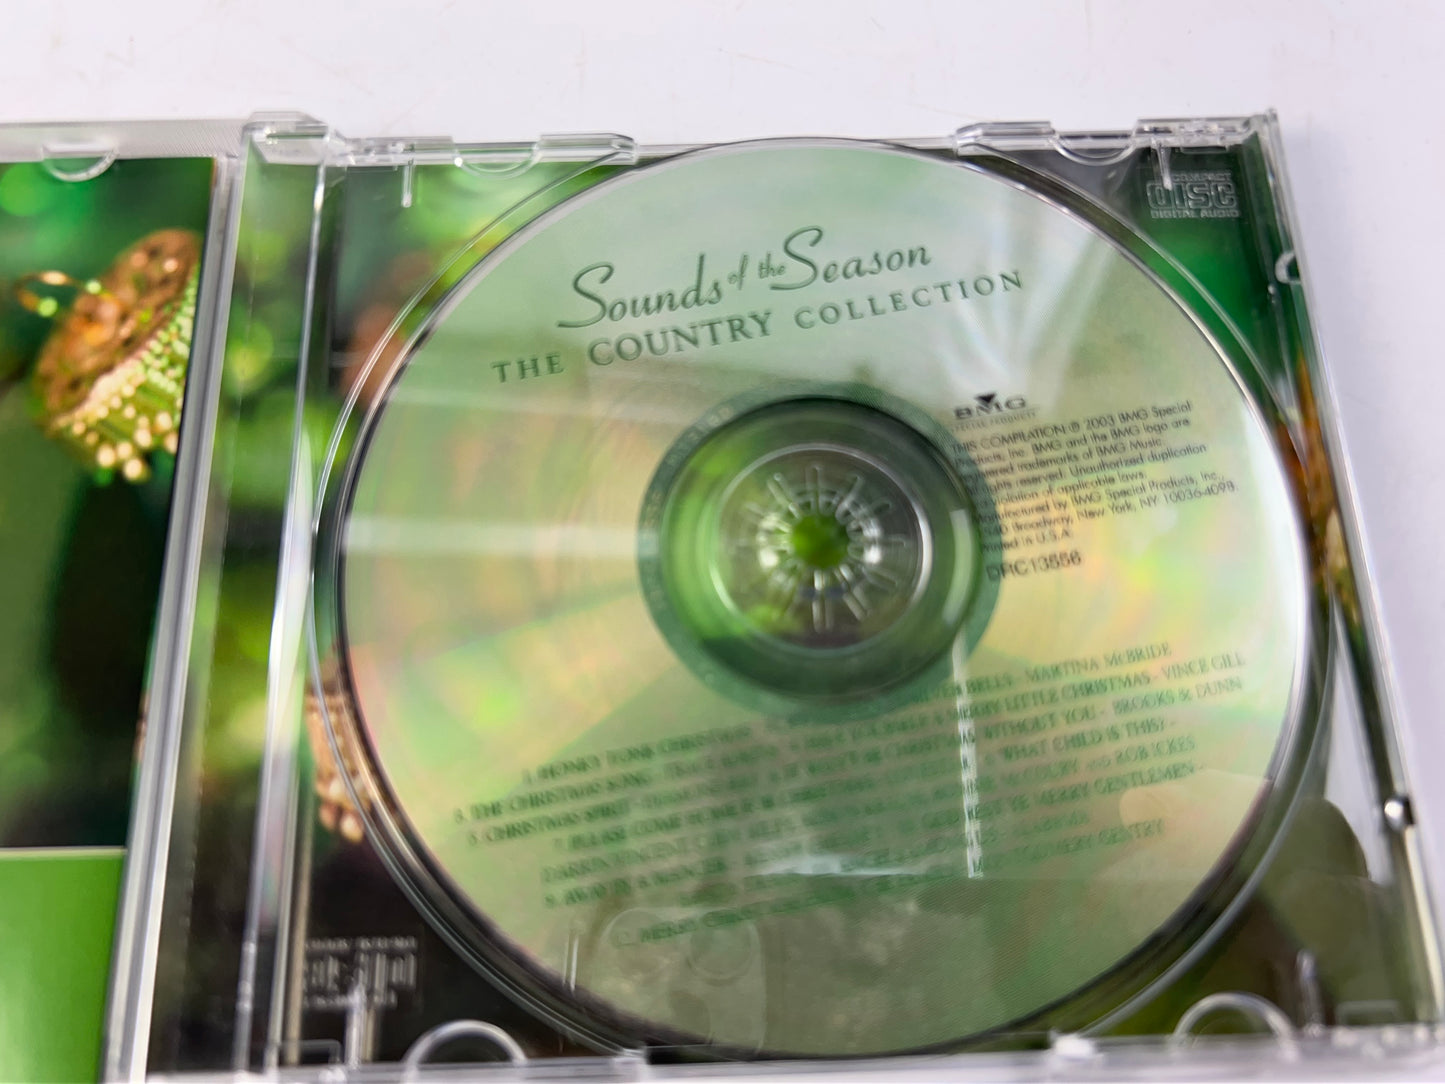 Sounds of the Season: The Country Collection [Audio CD]